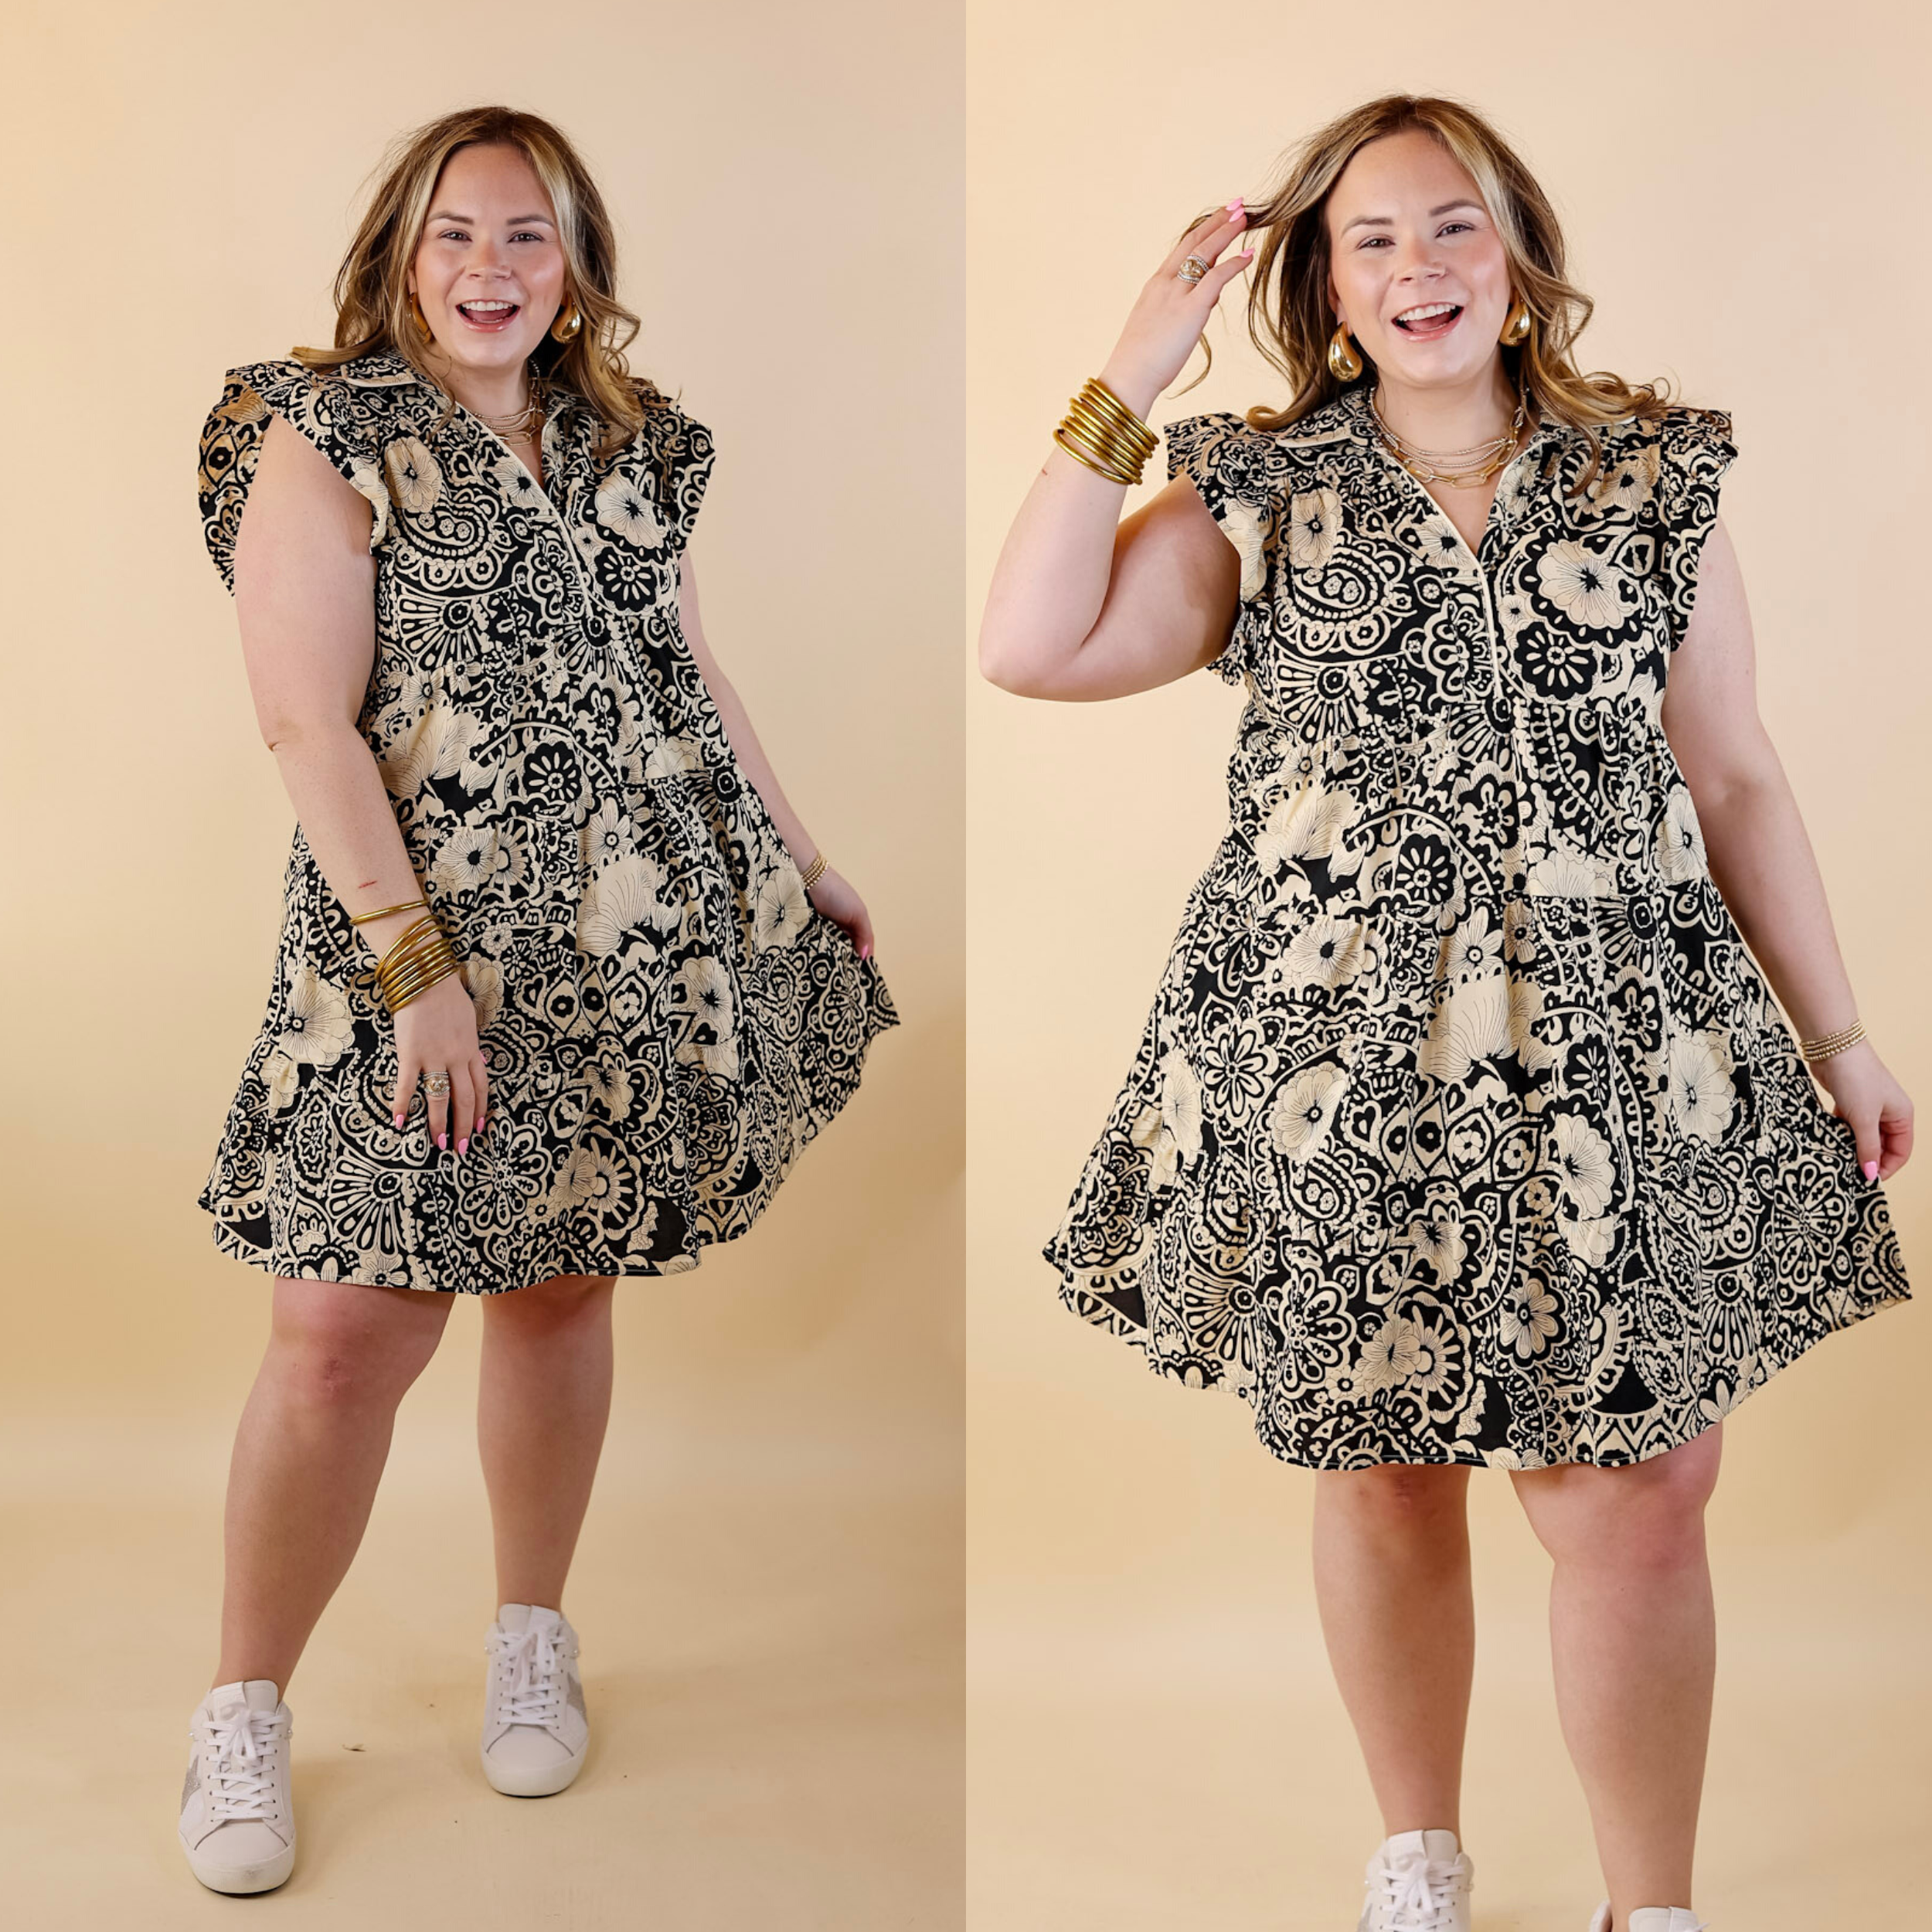 Classy Evenings Floral Print Collared Dress in Beige and Black - Giddy Up Glamour Boutique